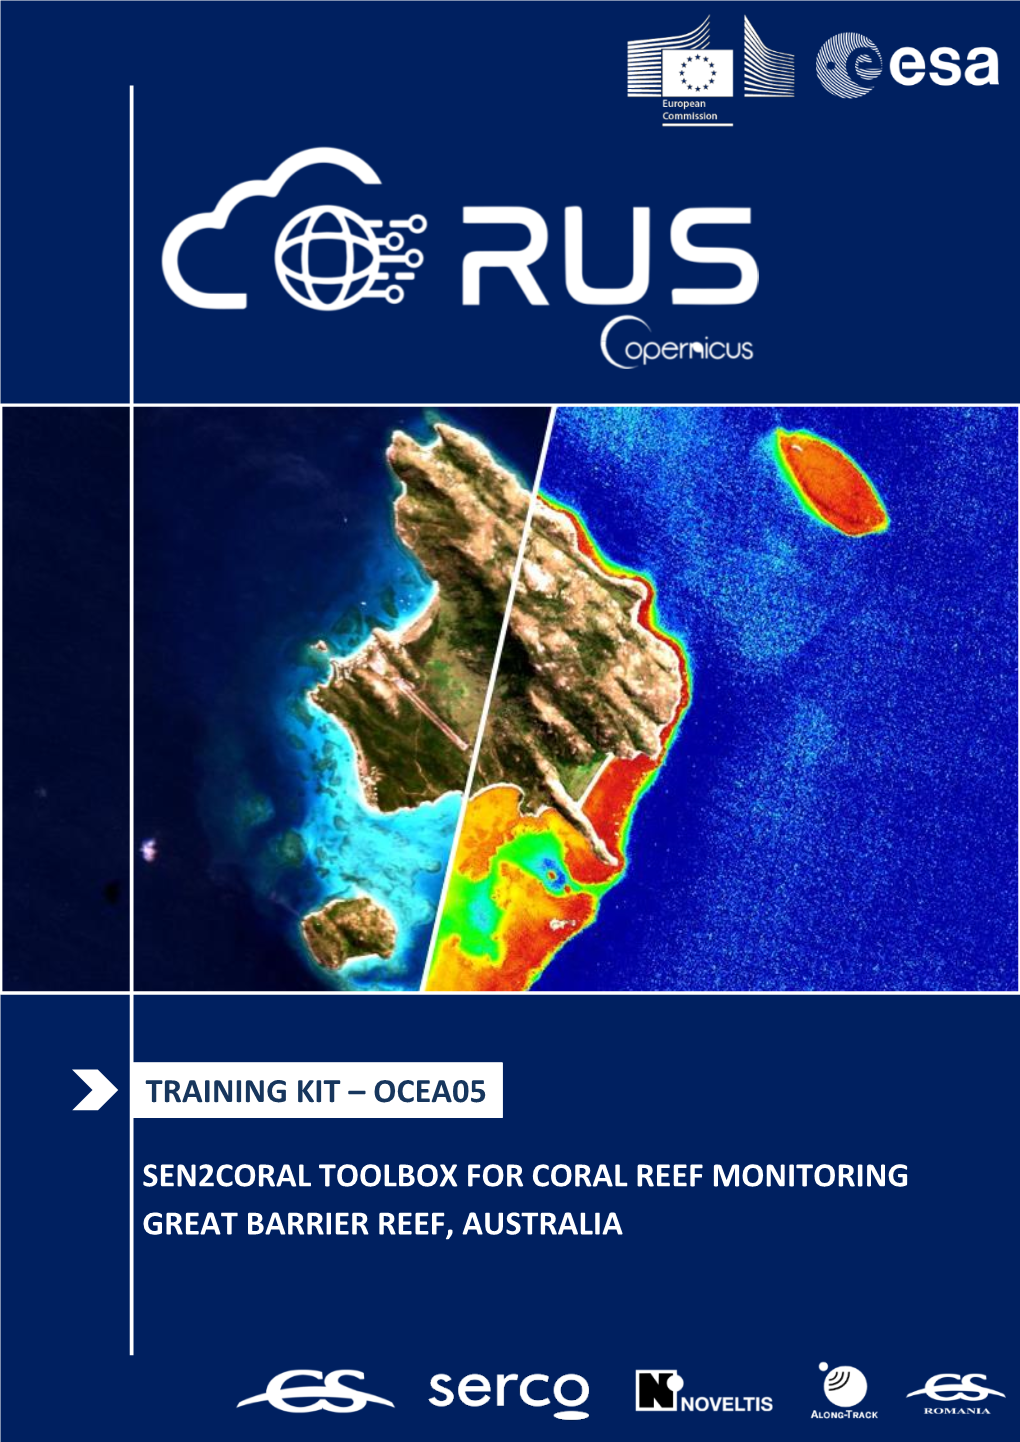 Sen2coral Toolbox for Coral Reef Monitoring Great Barrier Reef, Australia